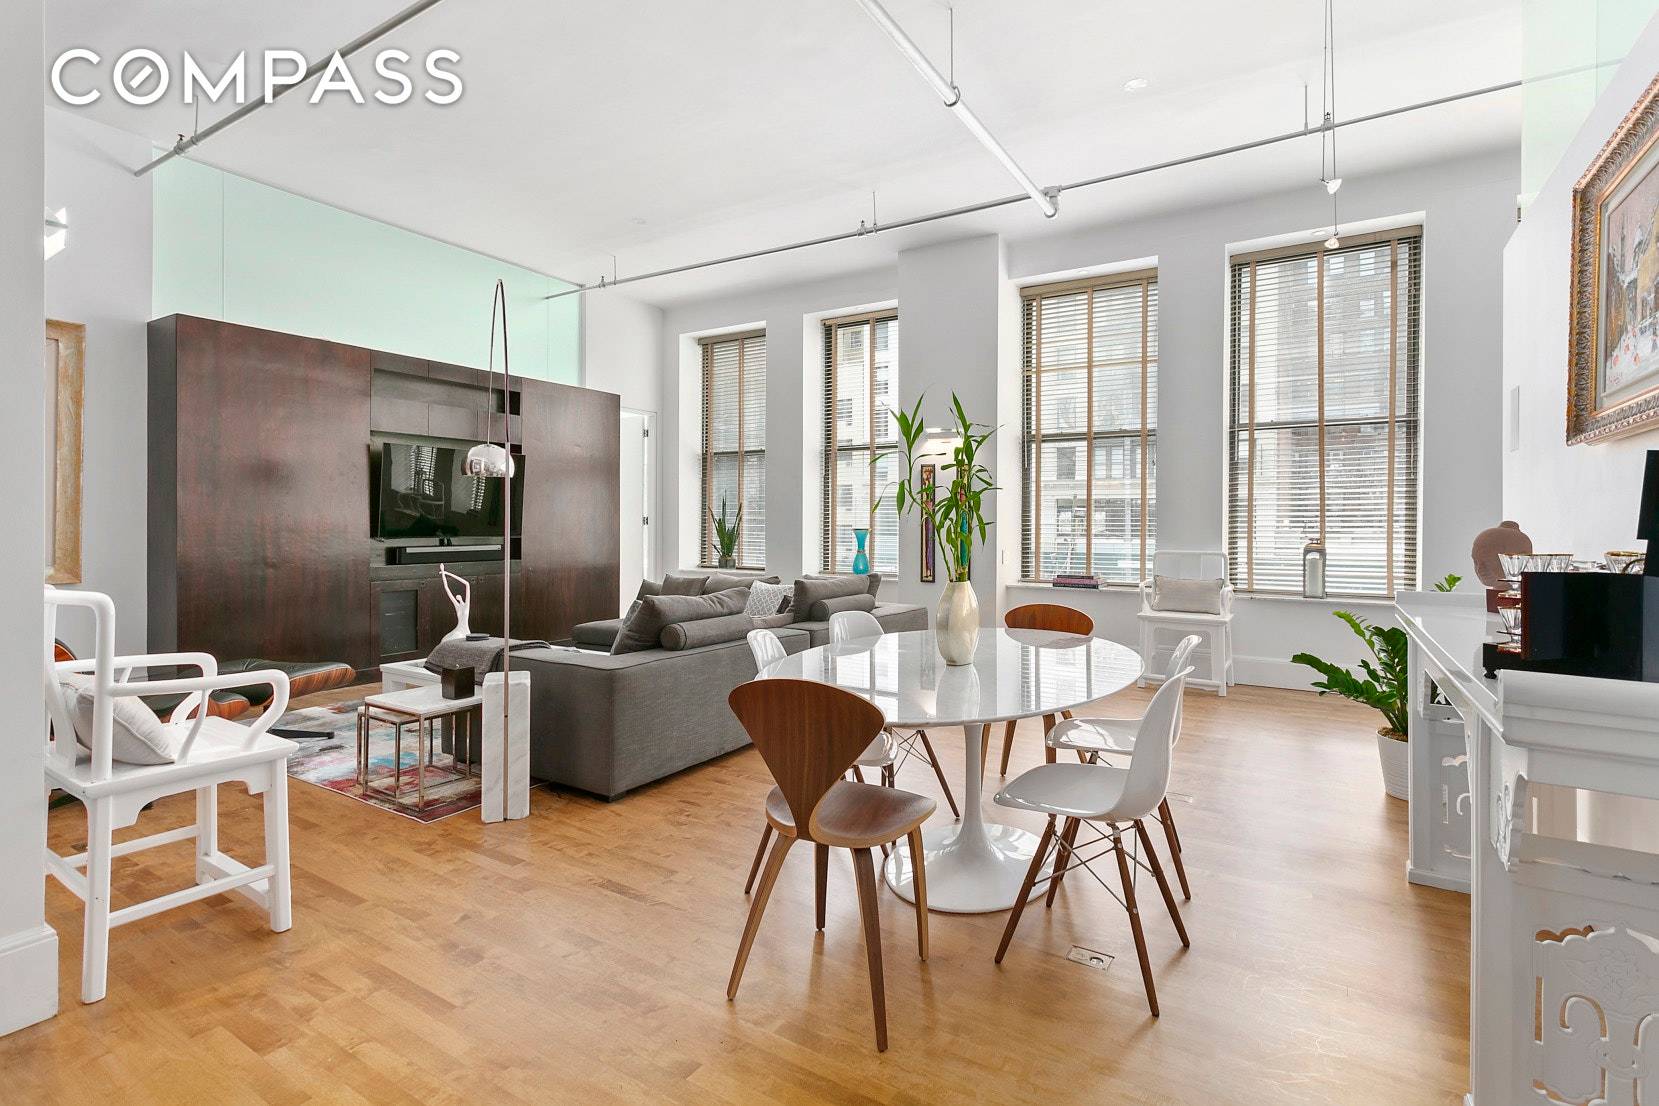 Distinguished by soaring 12' ceilings, and lined by 10 stunning double height windows, this modern yet classic loft is further graced by a renovation par excellence !